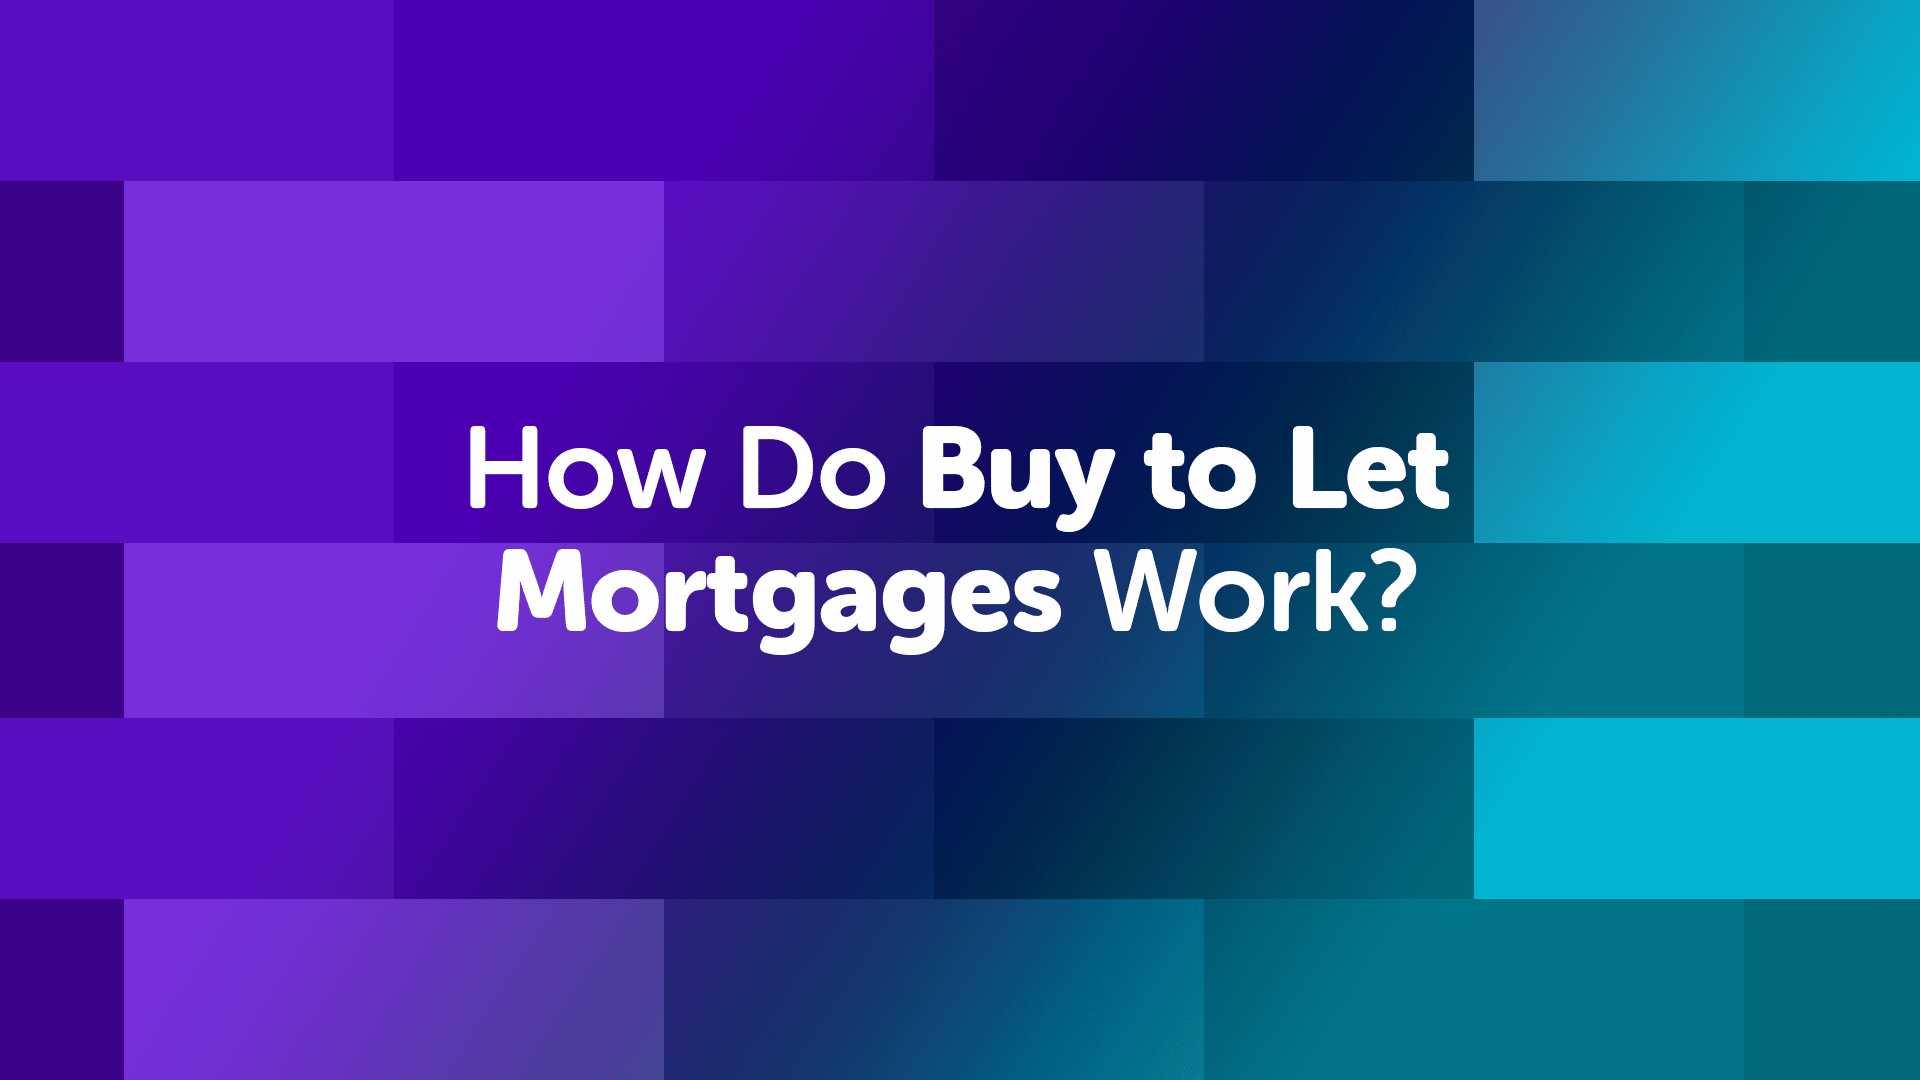 How Do Buy to Let Mortgages in London Work?